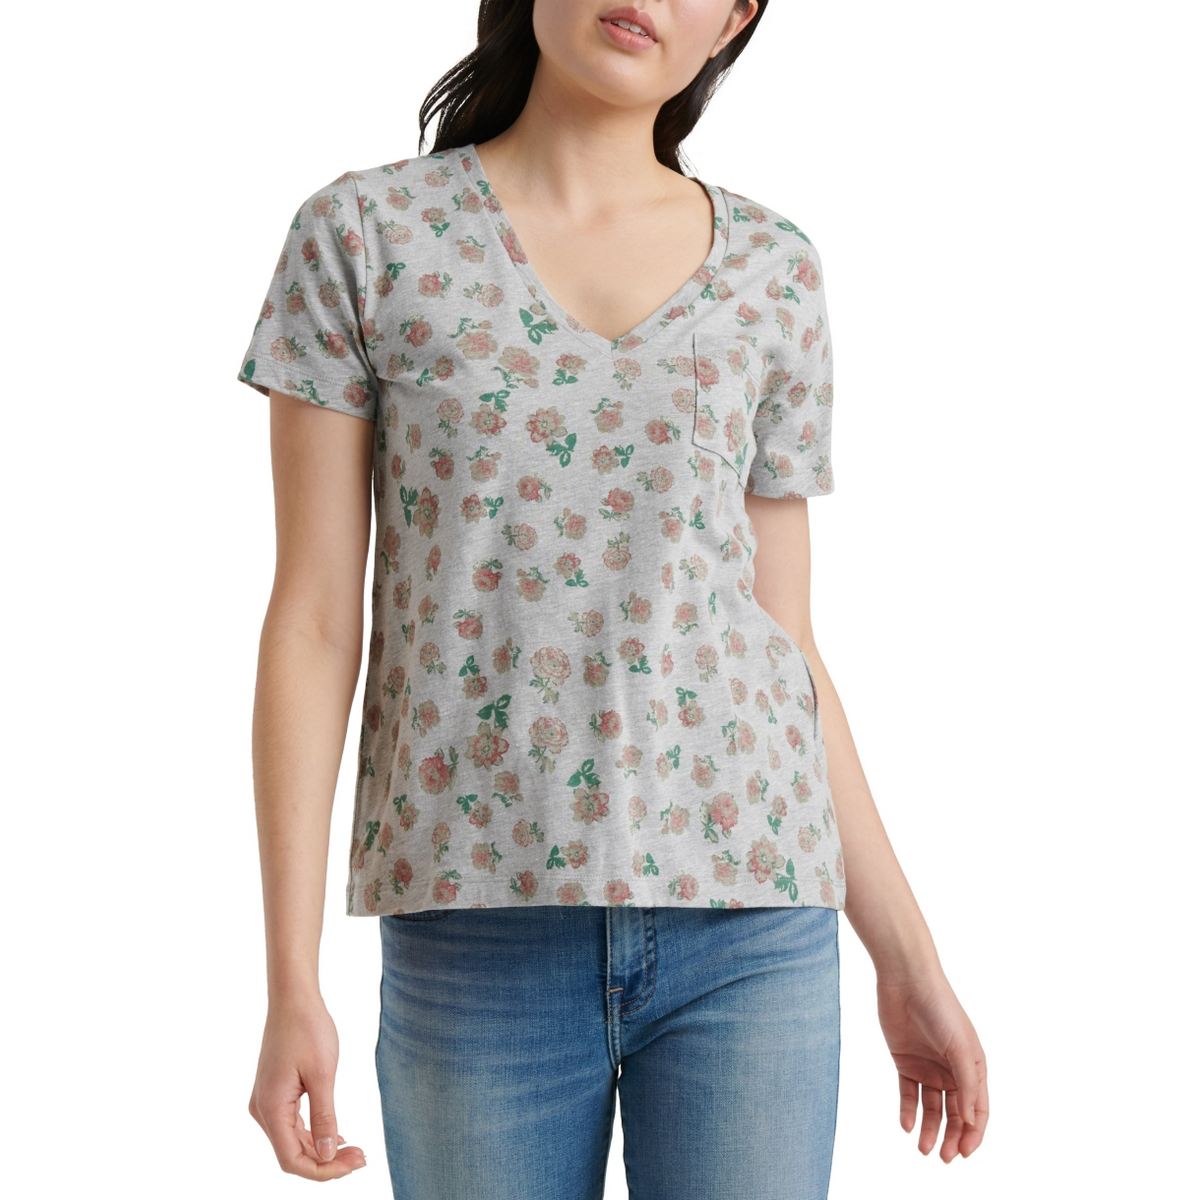 LUCKY BRAND NEW Women's Heather Grey Floral V-neck Tee Casual Shirt Top XS  TEDO